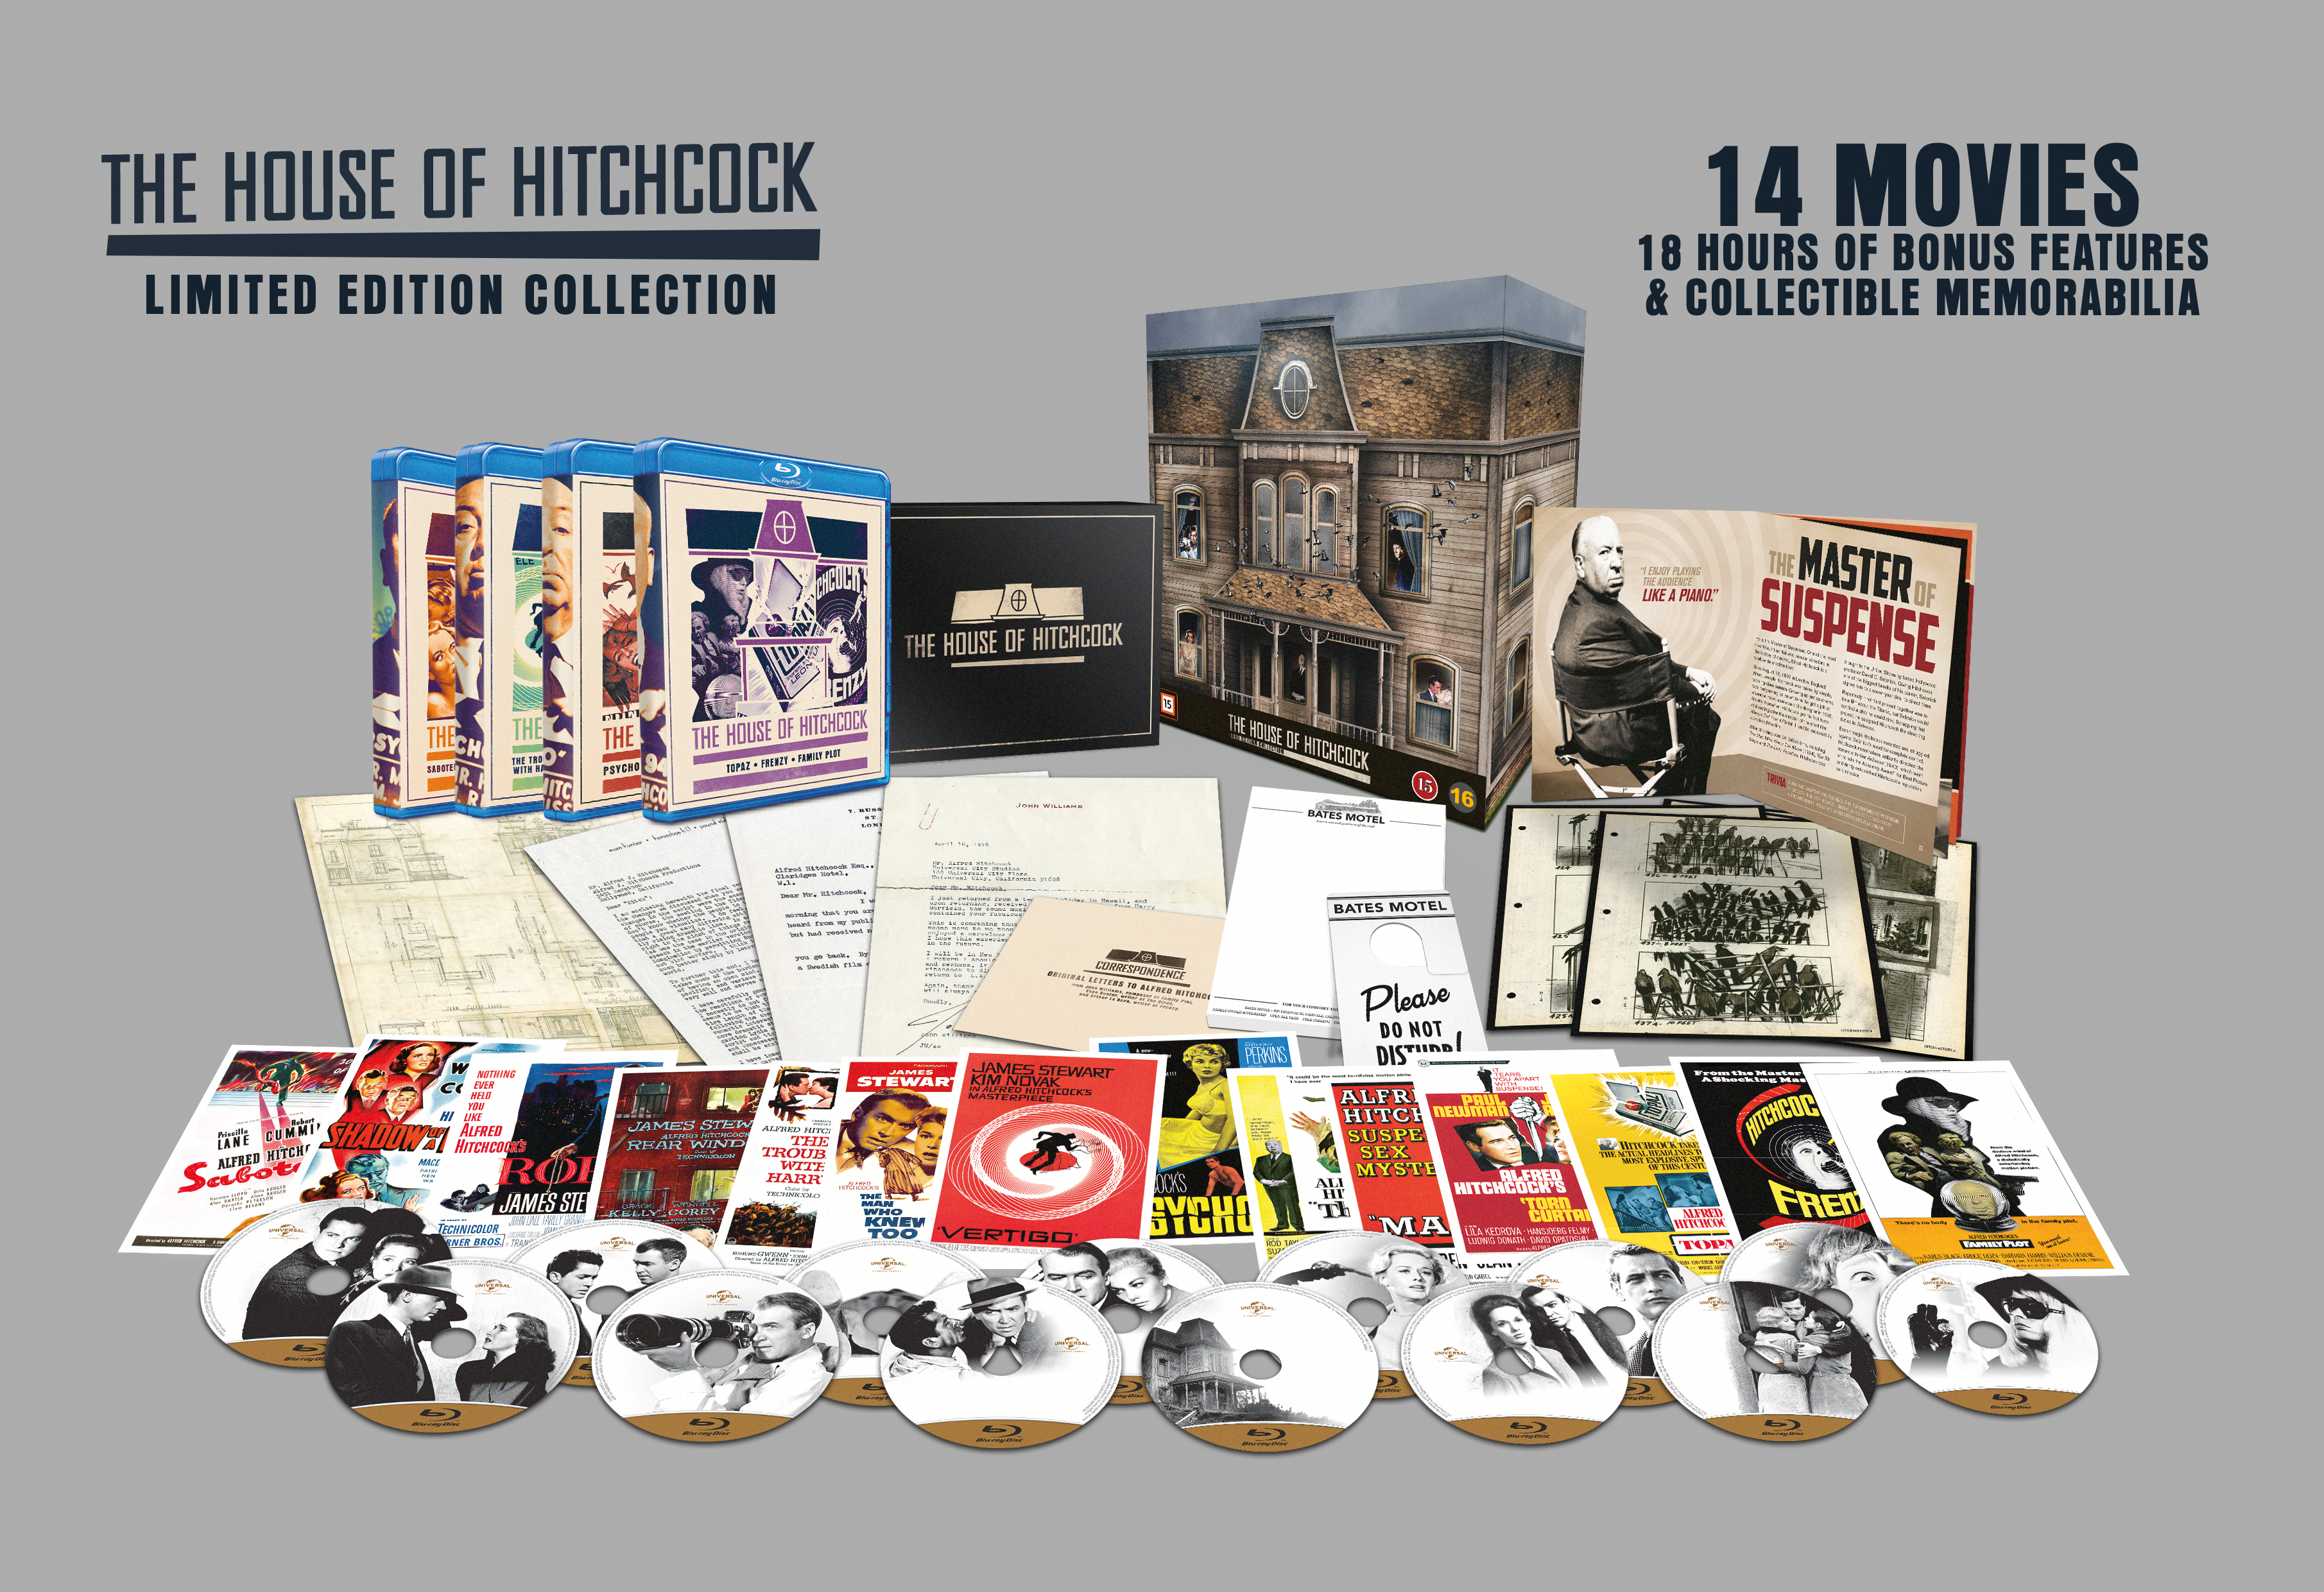 alfred-hitchcock-house-collection-blu-ray.jpg